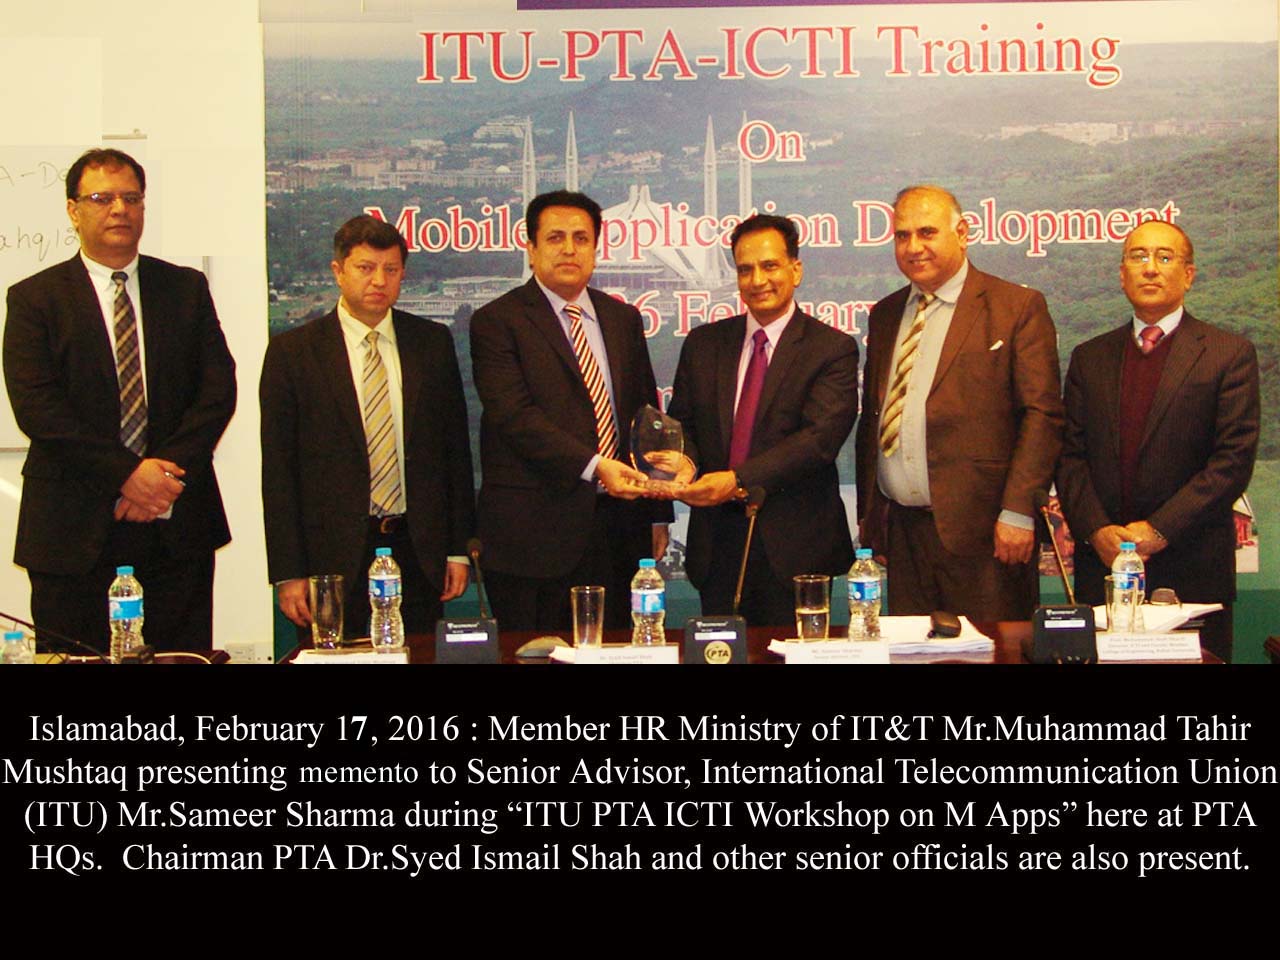 HR Minister of IT and Telecom  presenting memento